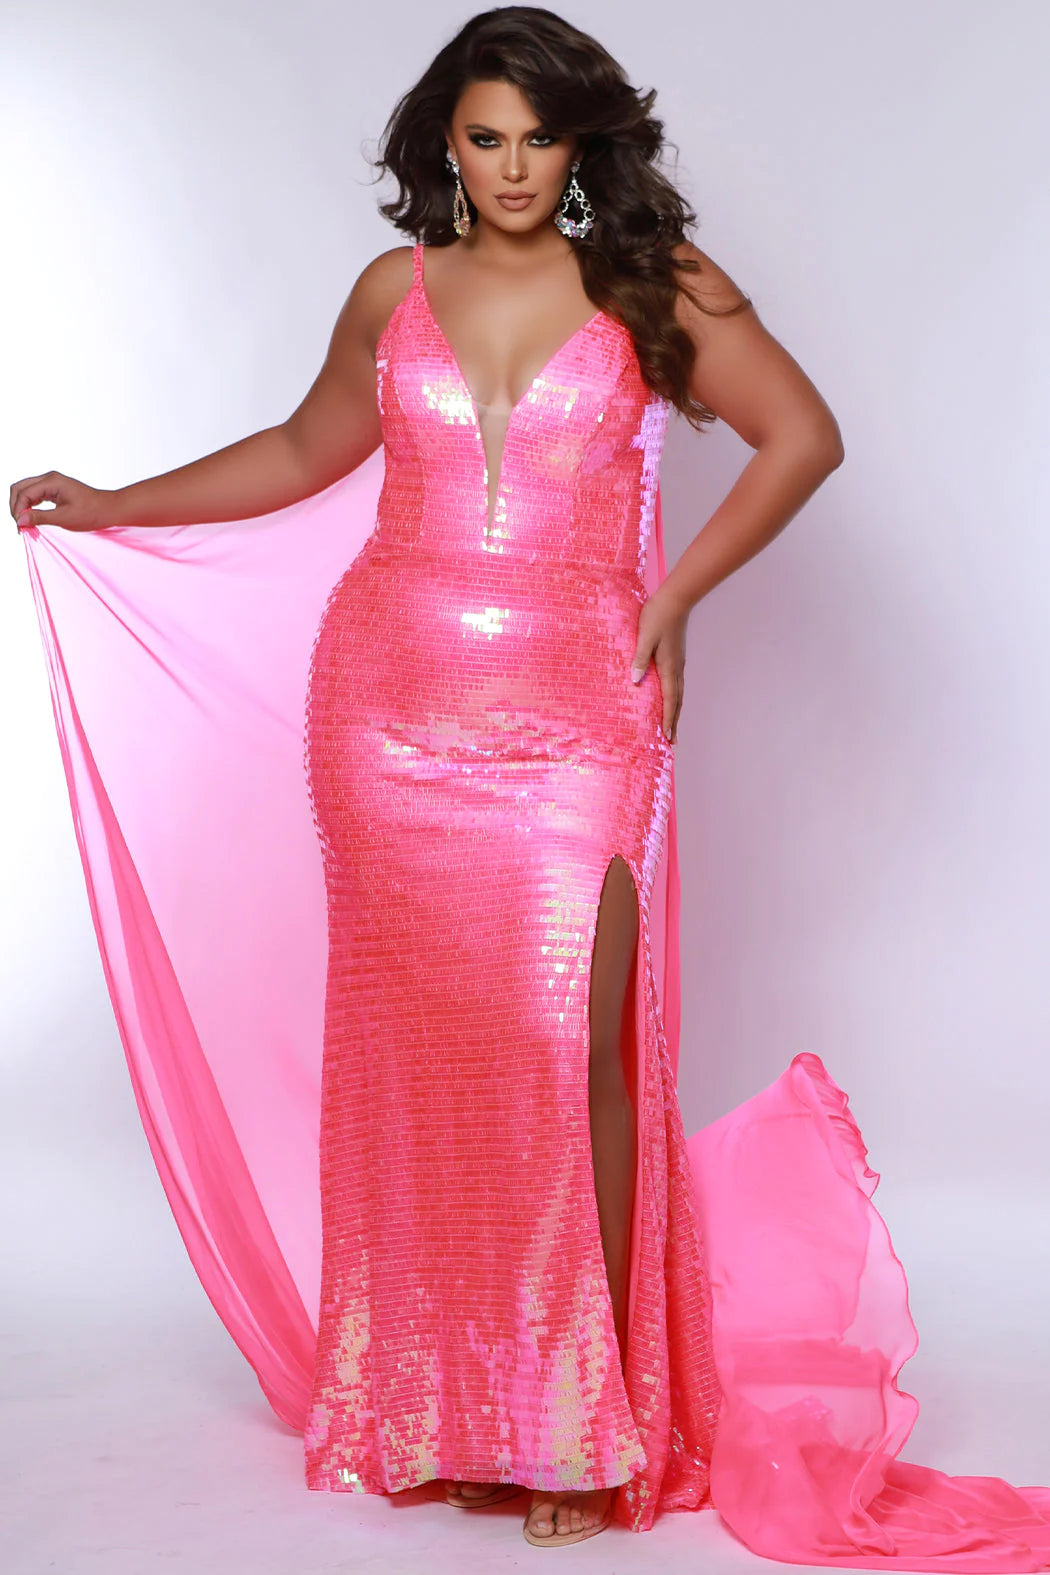 The Sydneys Closet JK2413 is a stunning long, fitted plus size prom dress with a sequin cape and a plunging neckline, V-back, and slit. The perfect dress for a special occasion, this gown is sure to make you stand out. Strut your stuff at any formal evening in this glamorous plus size sequin pageant gown. The Shocks floor-length evening dress dazzles in overall piano key fabric that sparkles all night.